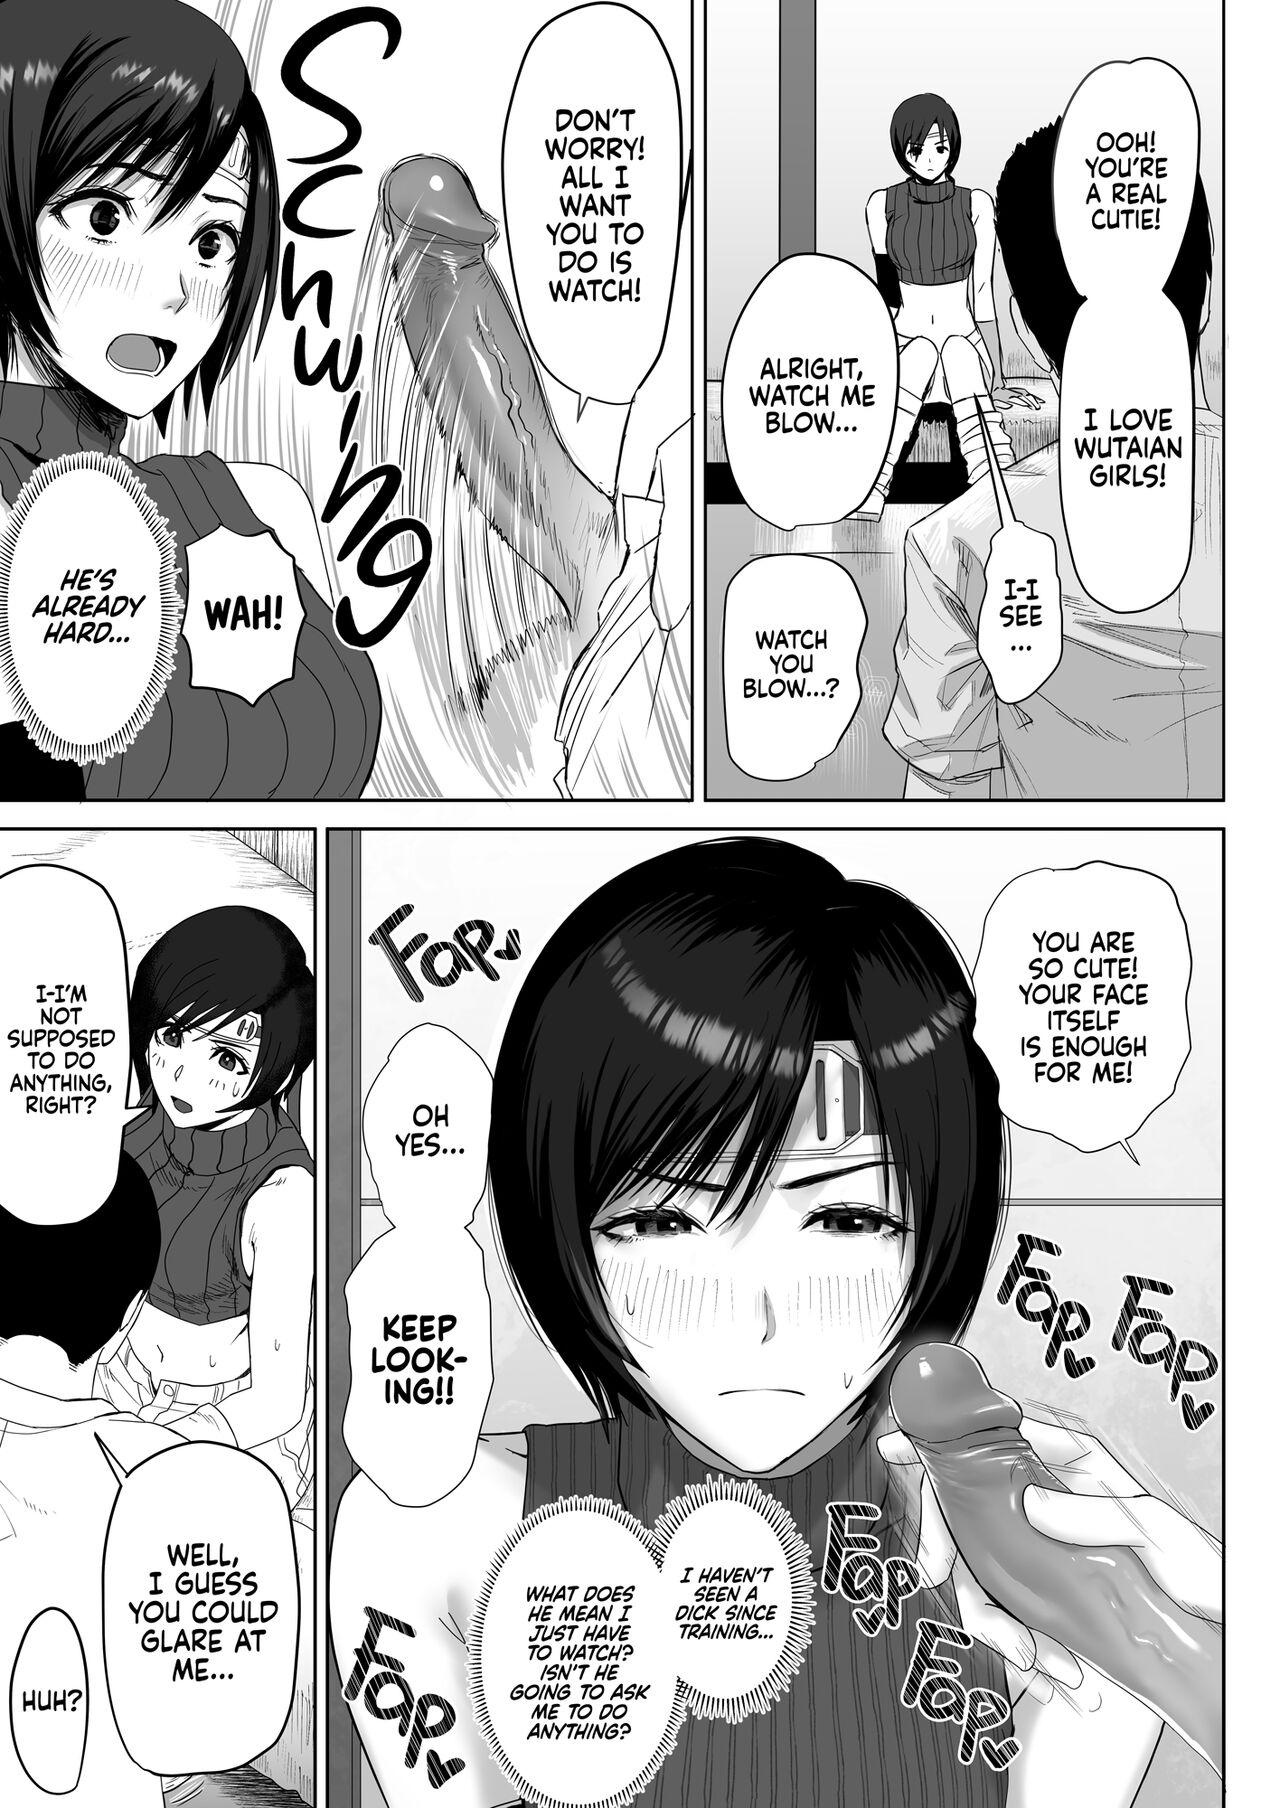 Wrestling Oniisan Wutai Musume Doudesuka? | What Do You Think of Wutaian Girls, Mister? - Final fantasy vii Gay Shorthair - Page 5